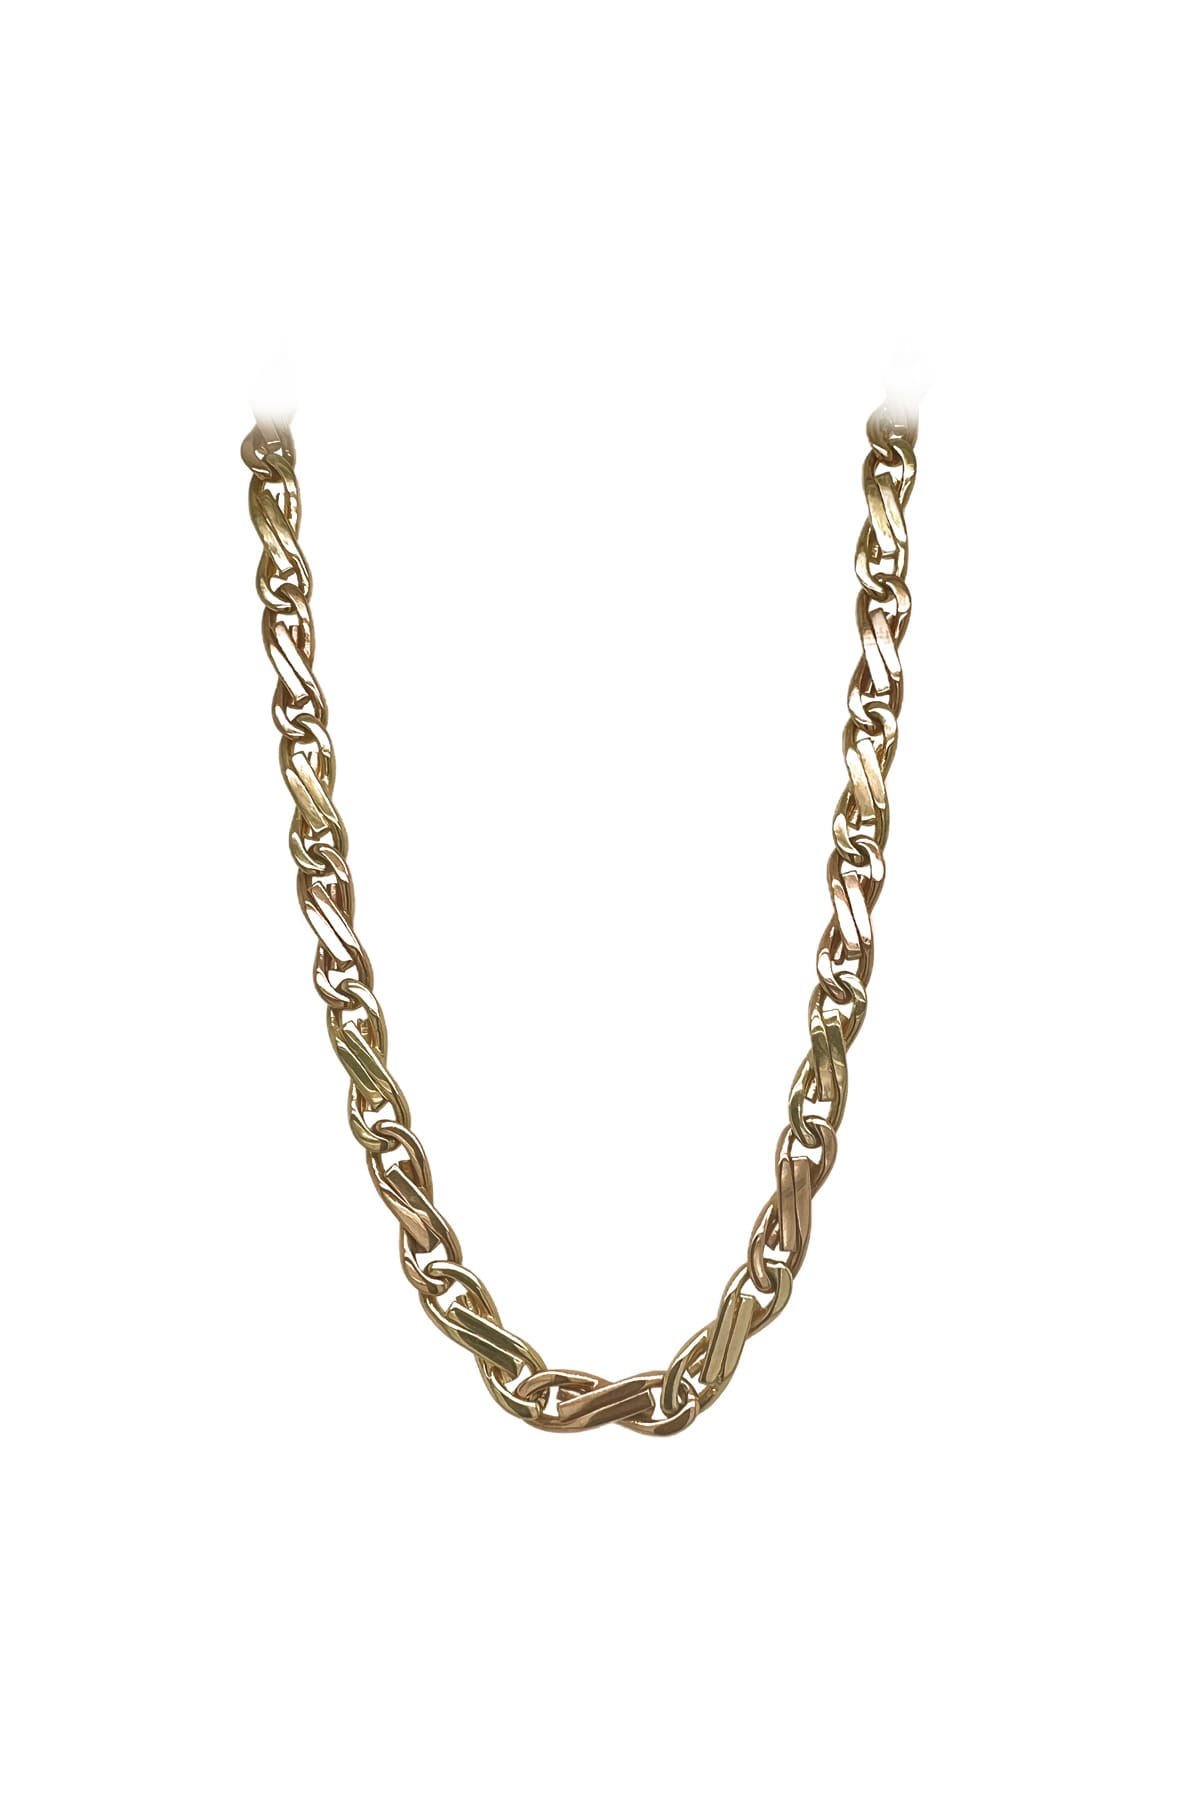 14 Carat Gold Fancy Exclusive Italian Link 55cm Chain available at LeGassick Diamonds and Jewellery Gold Coast, Australia.